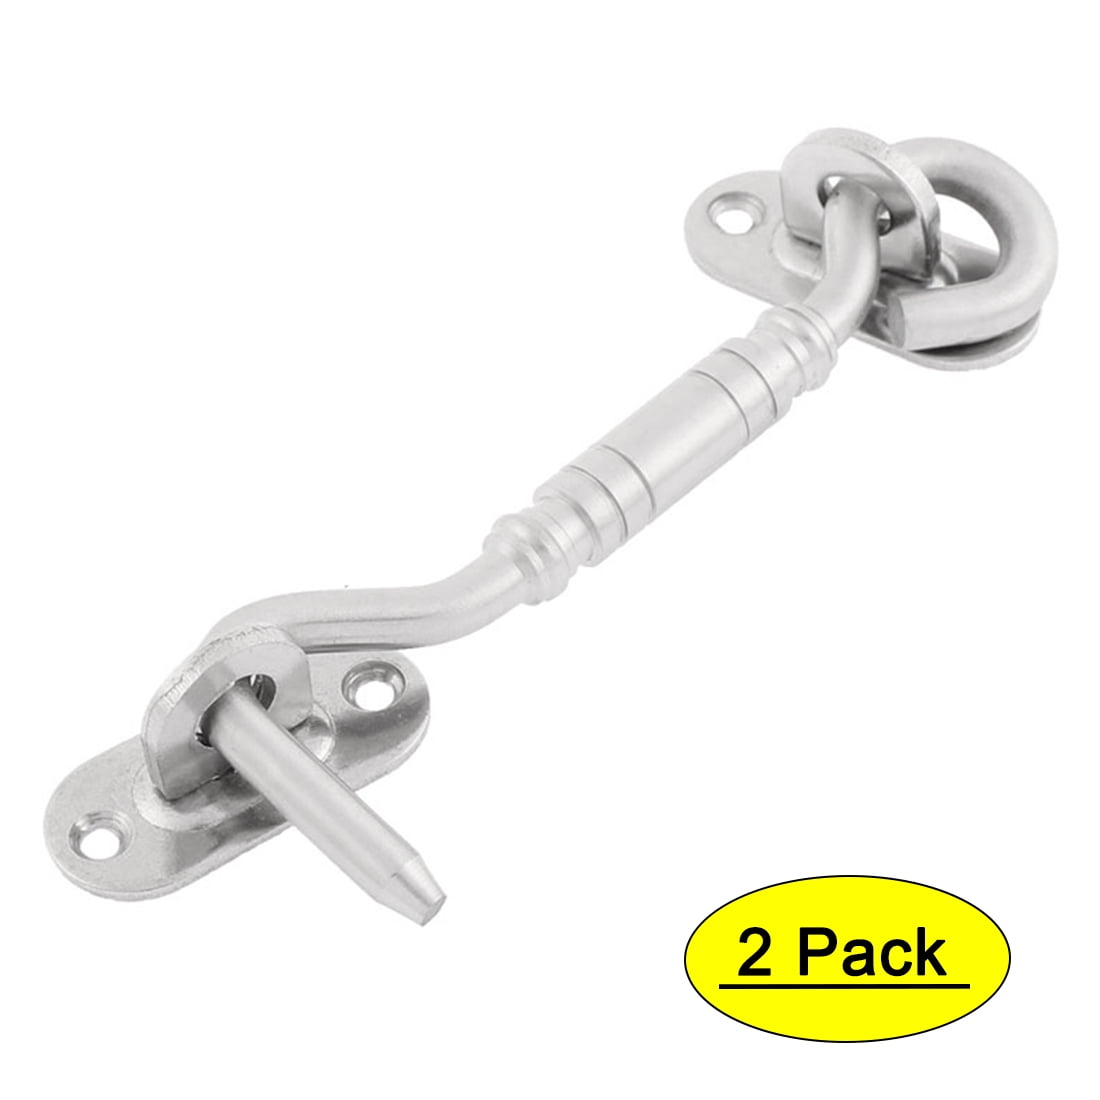 2 PCS Cabin Hook and Eye Solid Stainless Steel Finish 4" 6" 8" Inch Gate Door